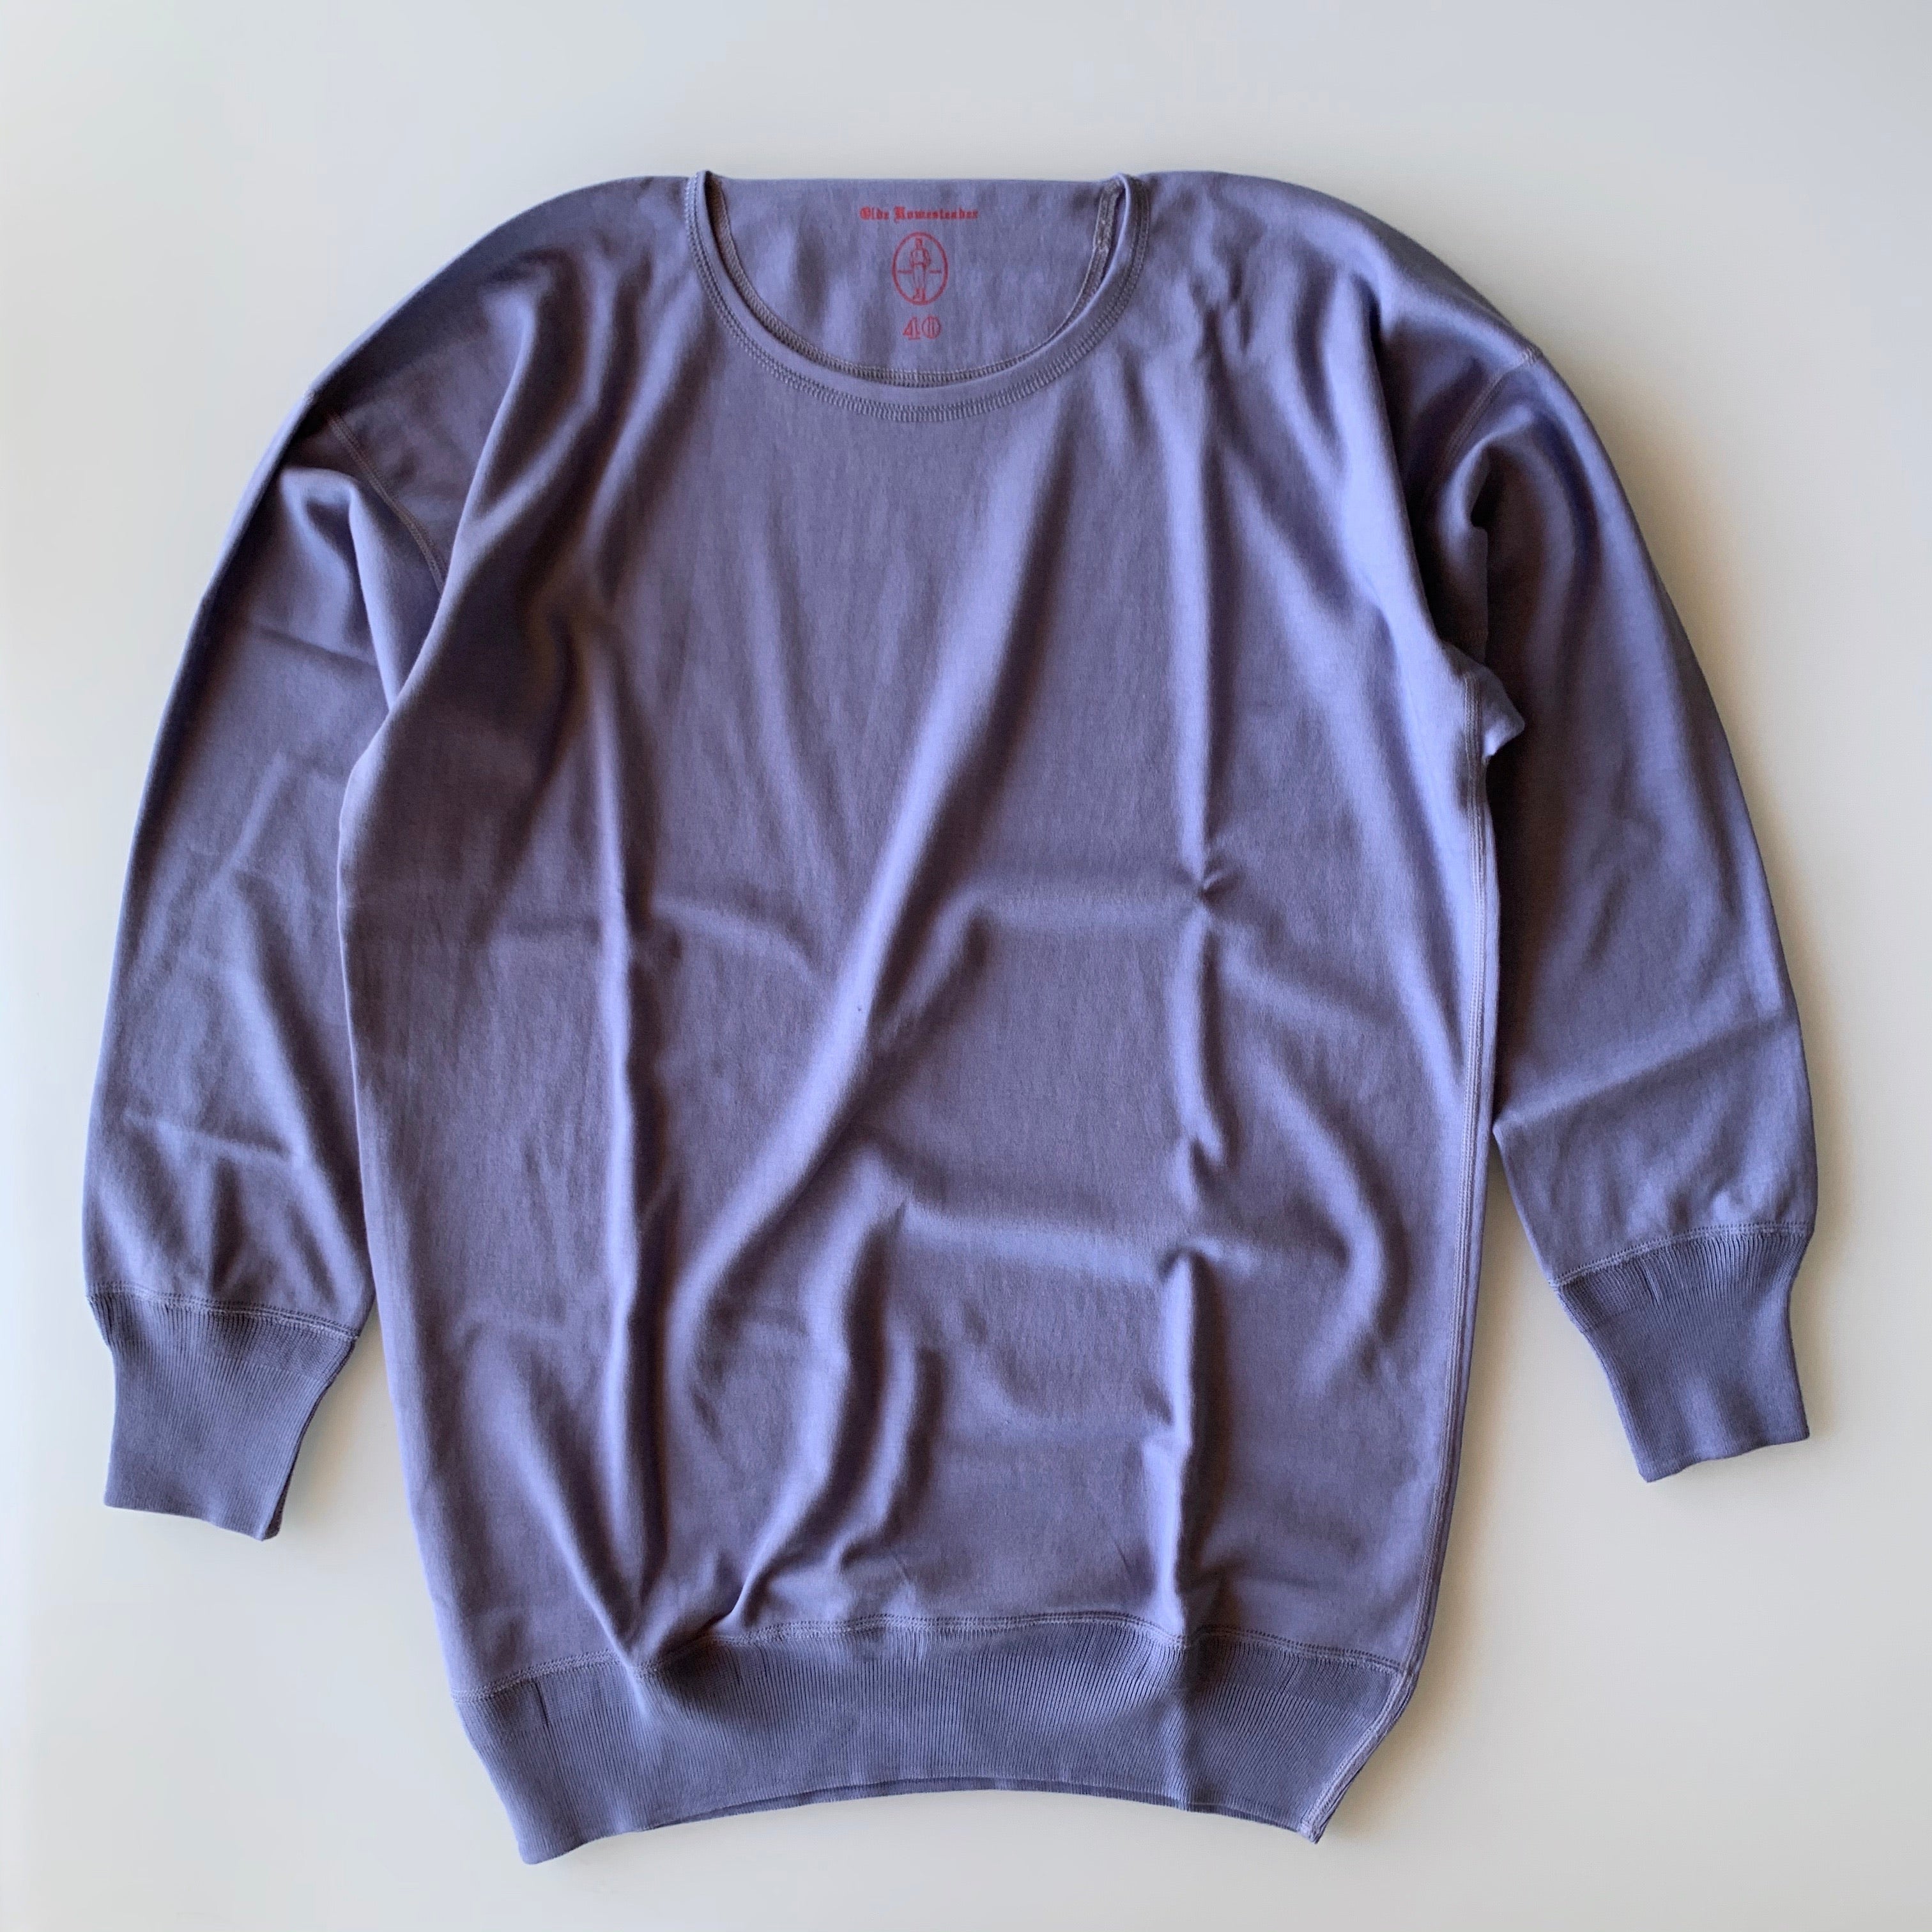 US004 Crew Neck Long Sleeve in French Blue